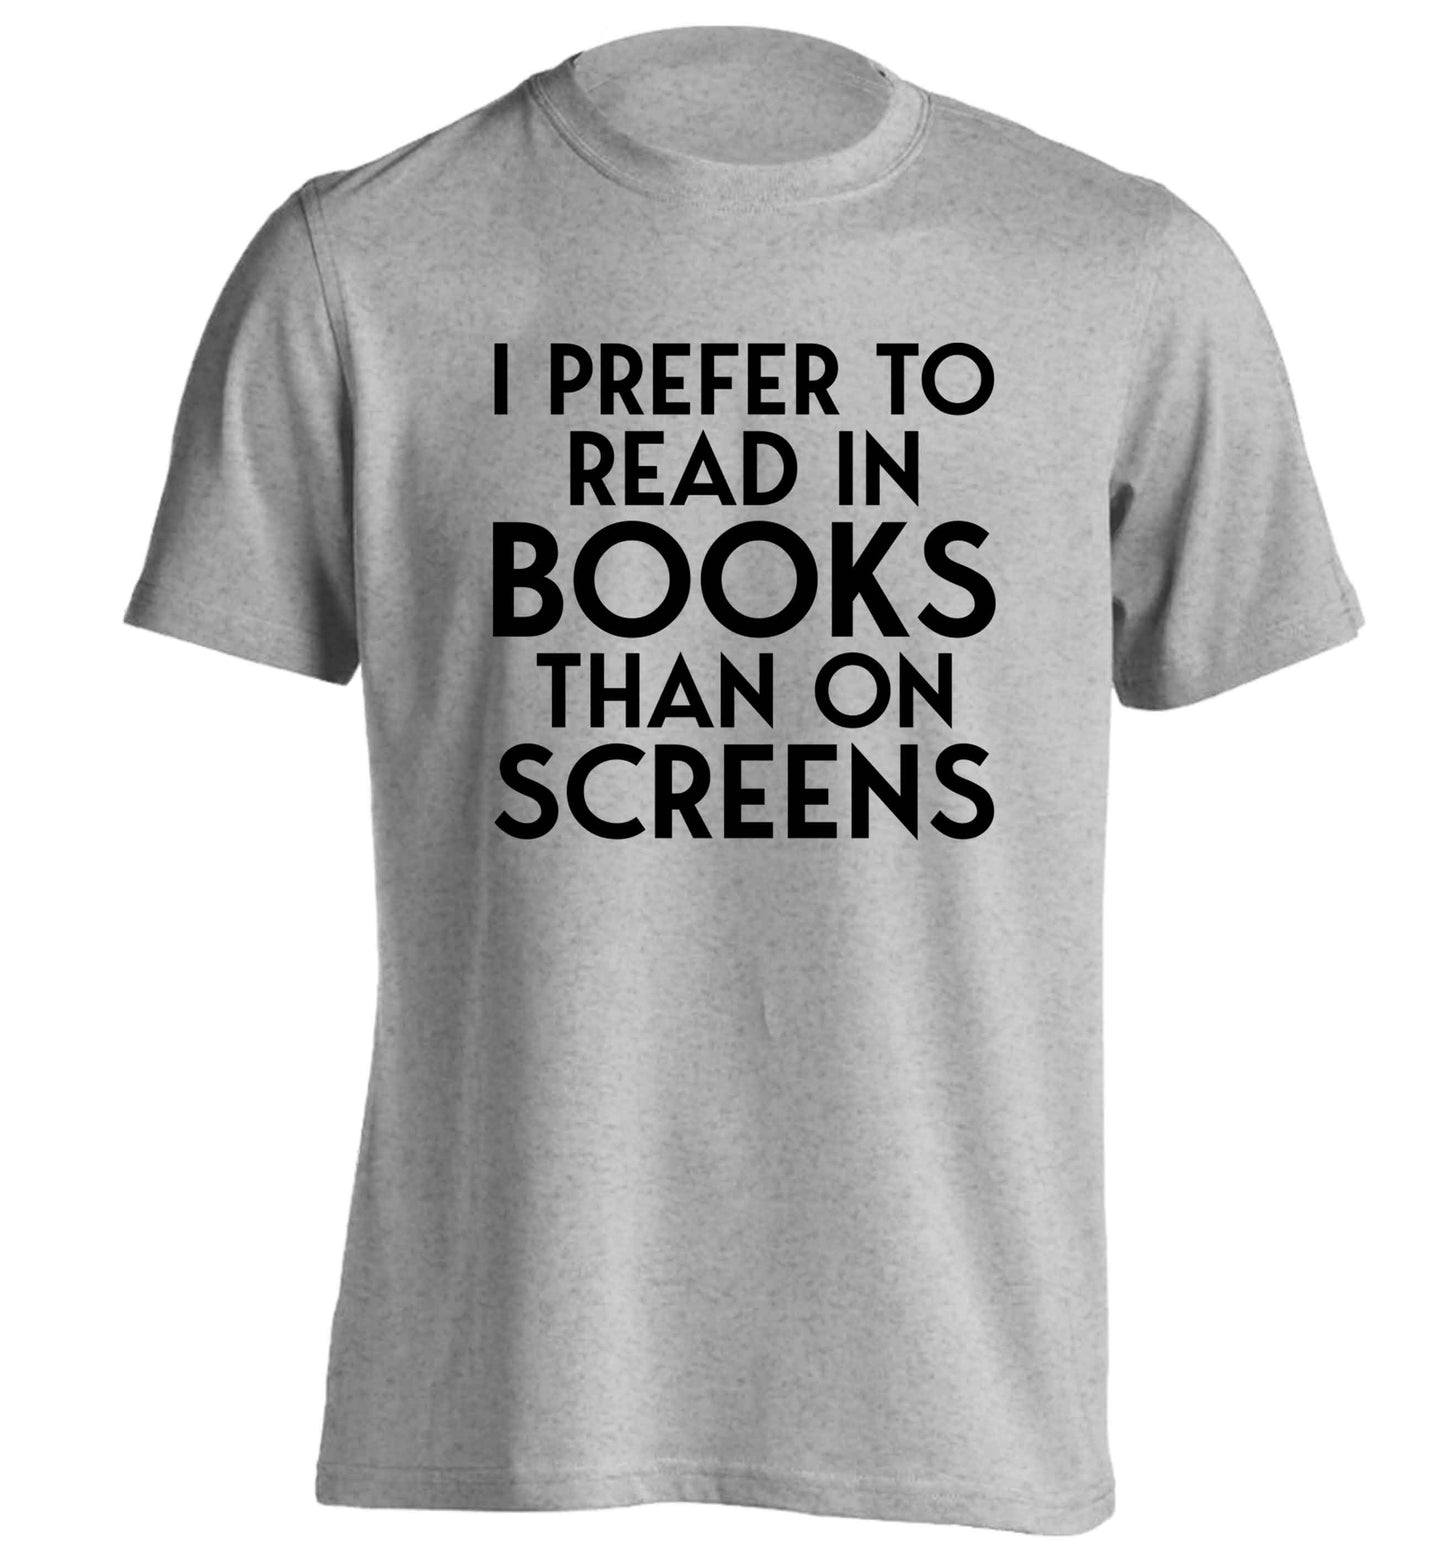 I prefer to read in books than on screens adults unisex grey Tshirt 2XL